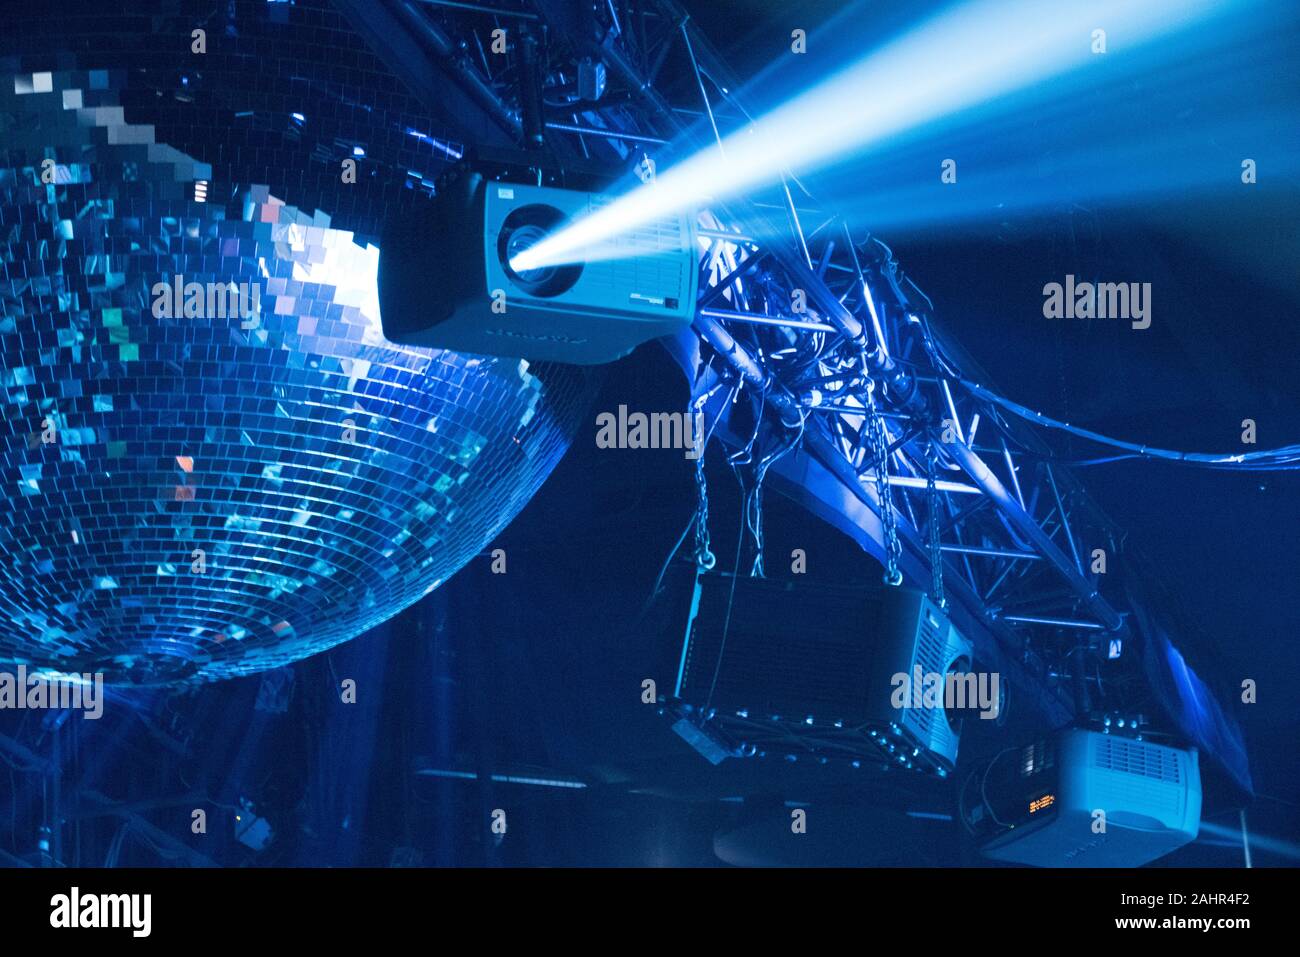 Artistic image of theatrical lighting with large disco ball and shafts of light from single source Stock Photo